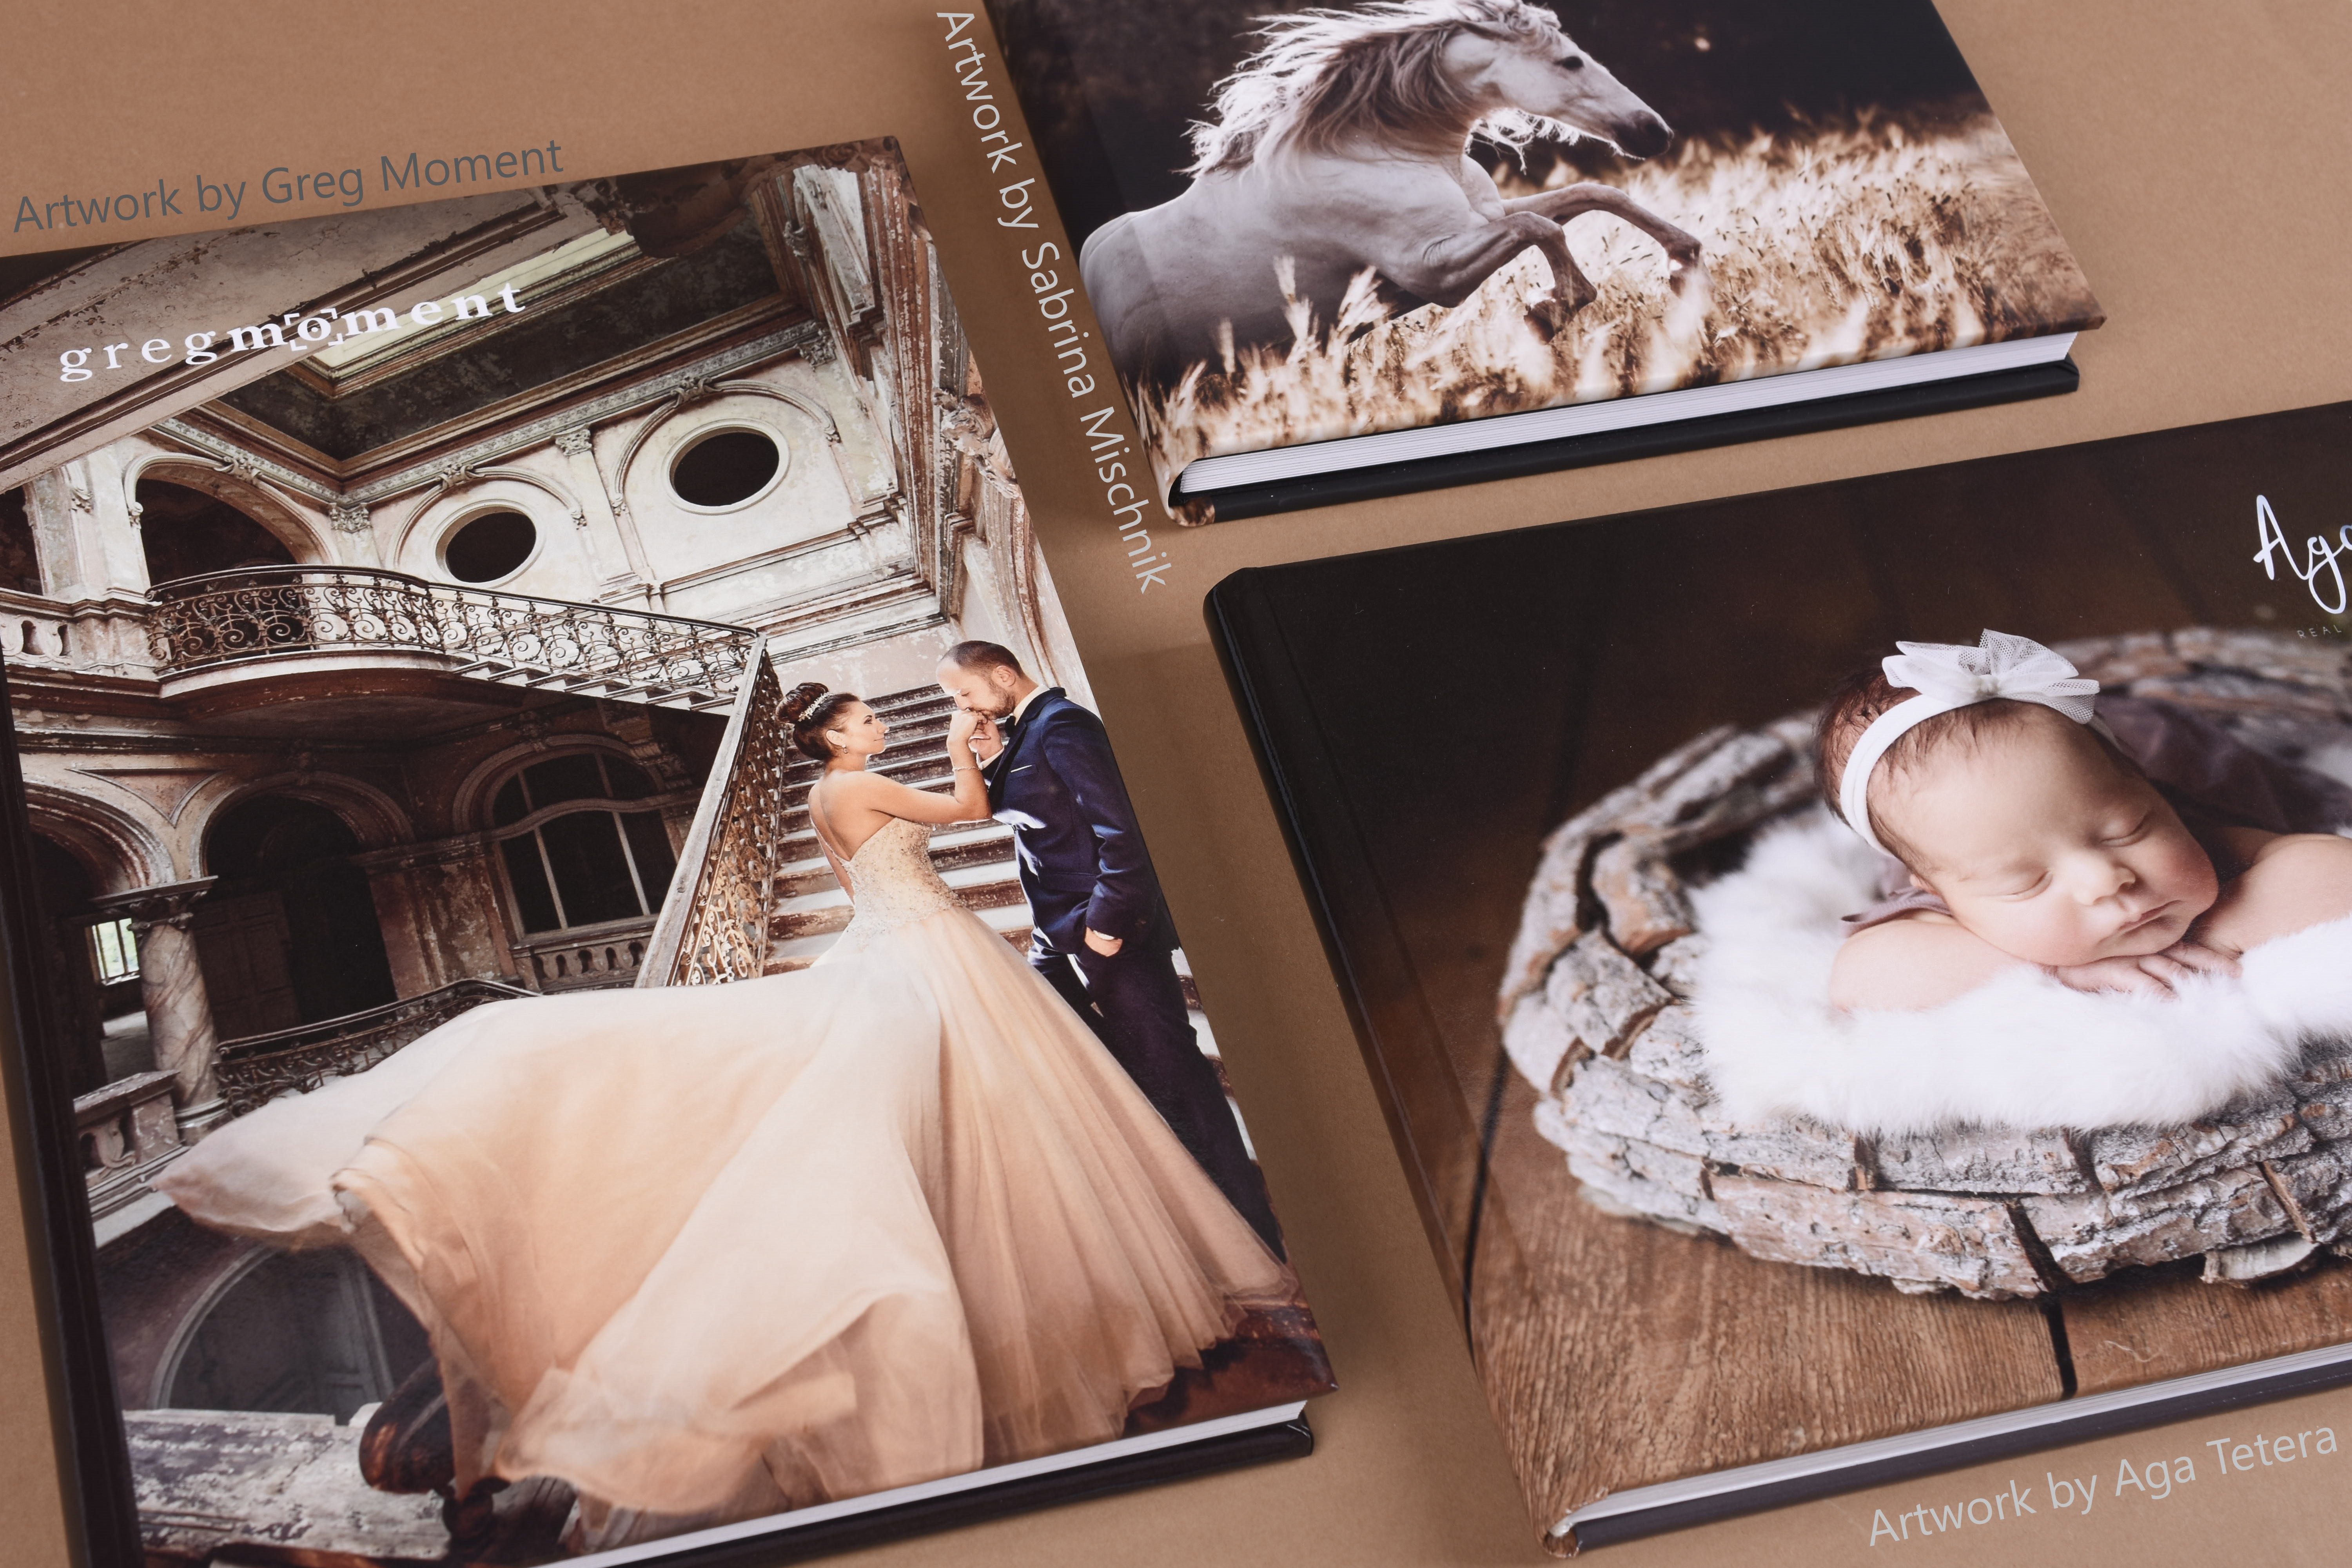 Artwork by Greg Moment, Sabrina Mischnik, and Aga Tetera; our Creative Photo Albums are ideal for that personalized product.